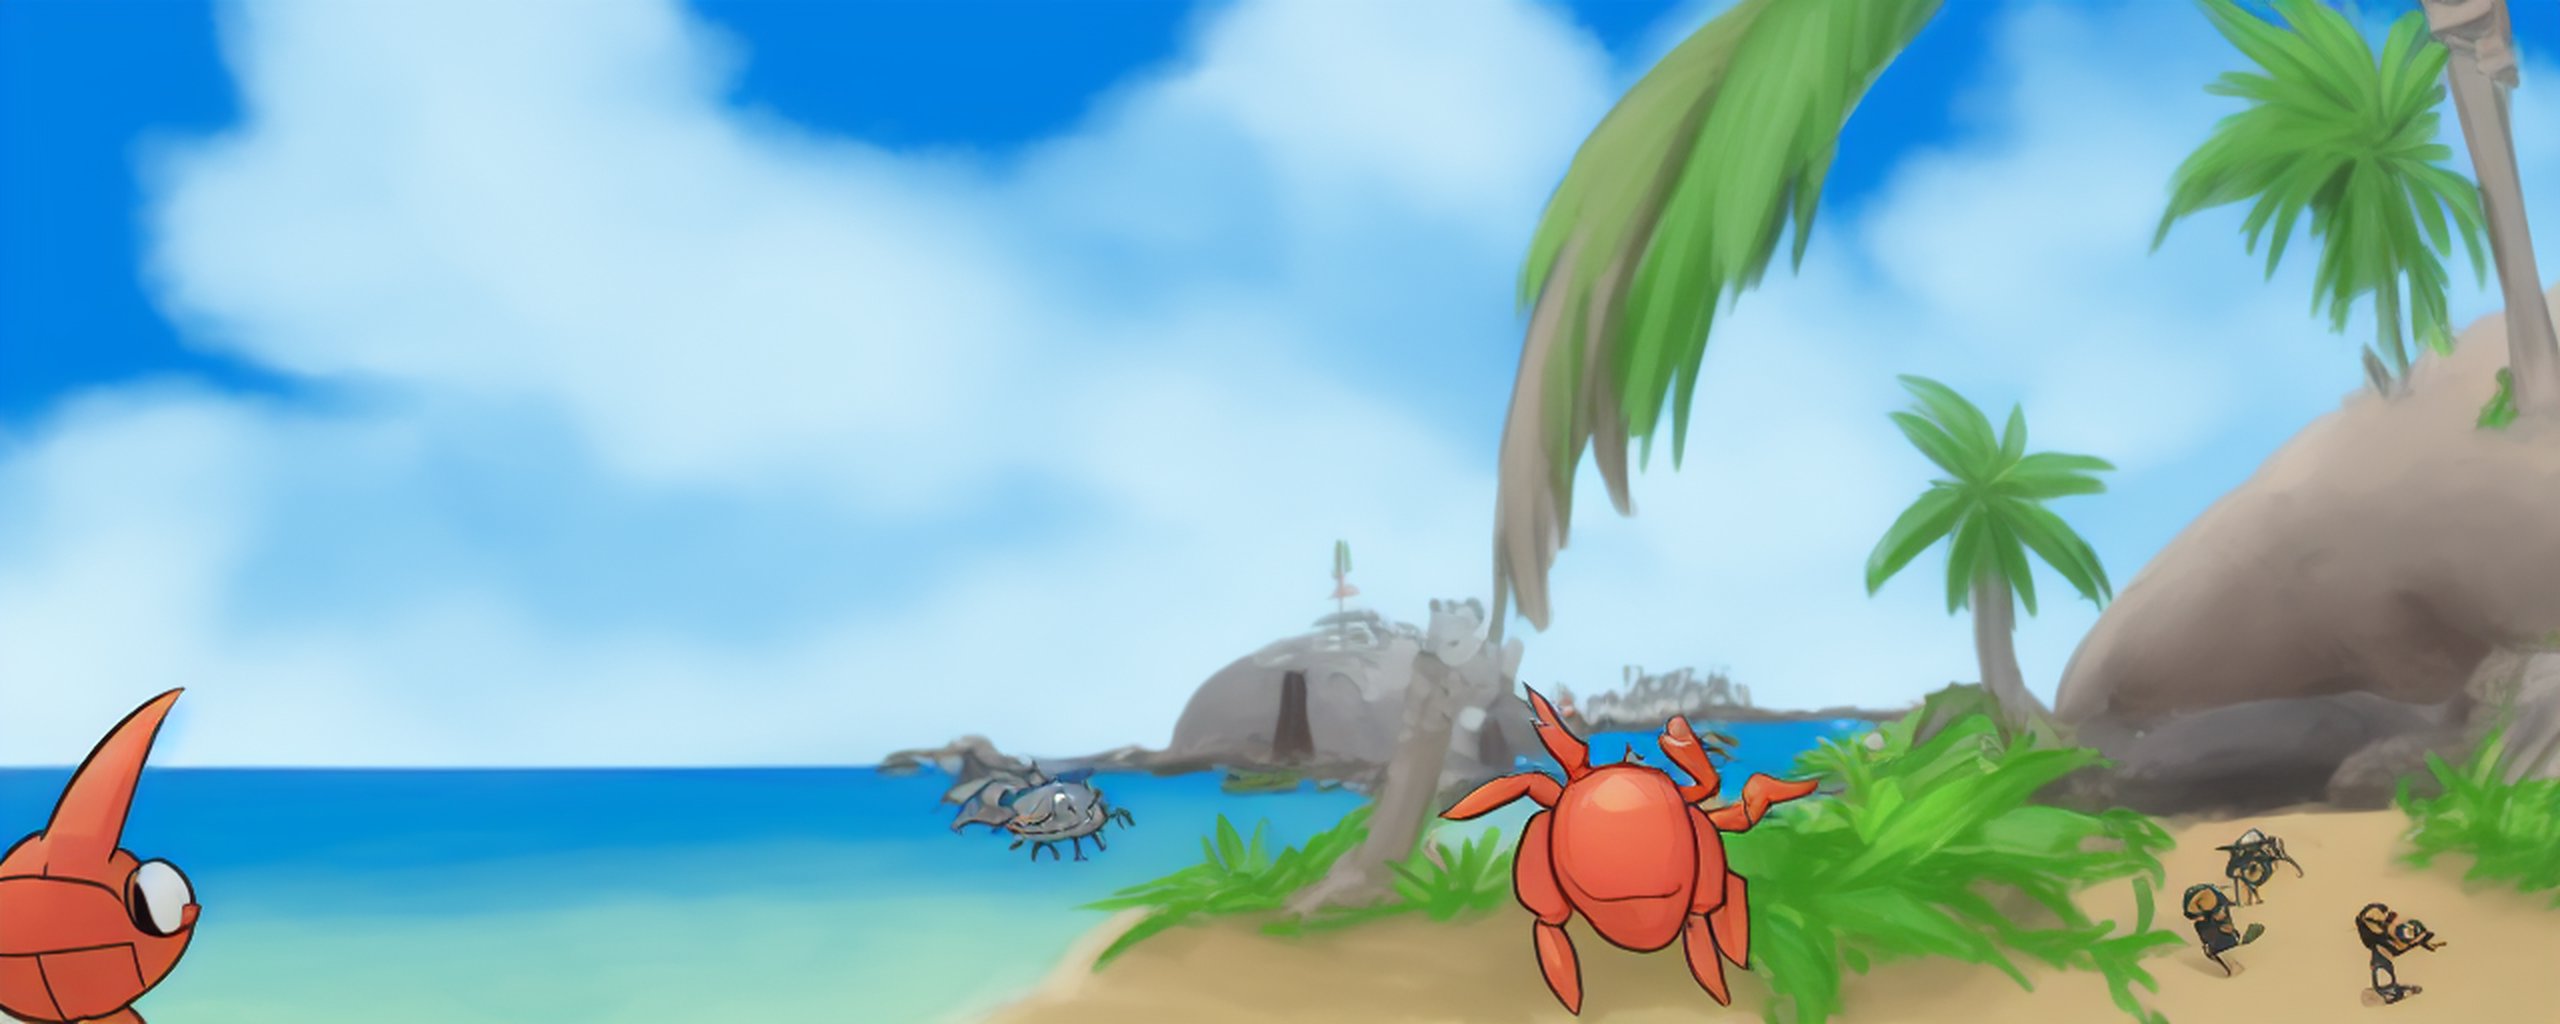 An image of crabs, invasion, beach, palm trees, green hill zone, studio ghibli, xenoblade chronicles 2, pokemon, ken sugimori, thick outlines, ink